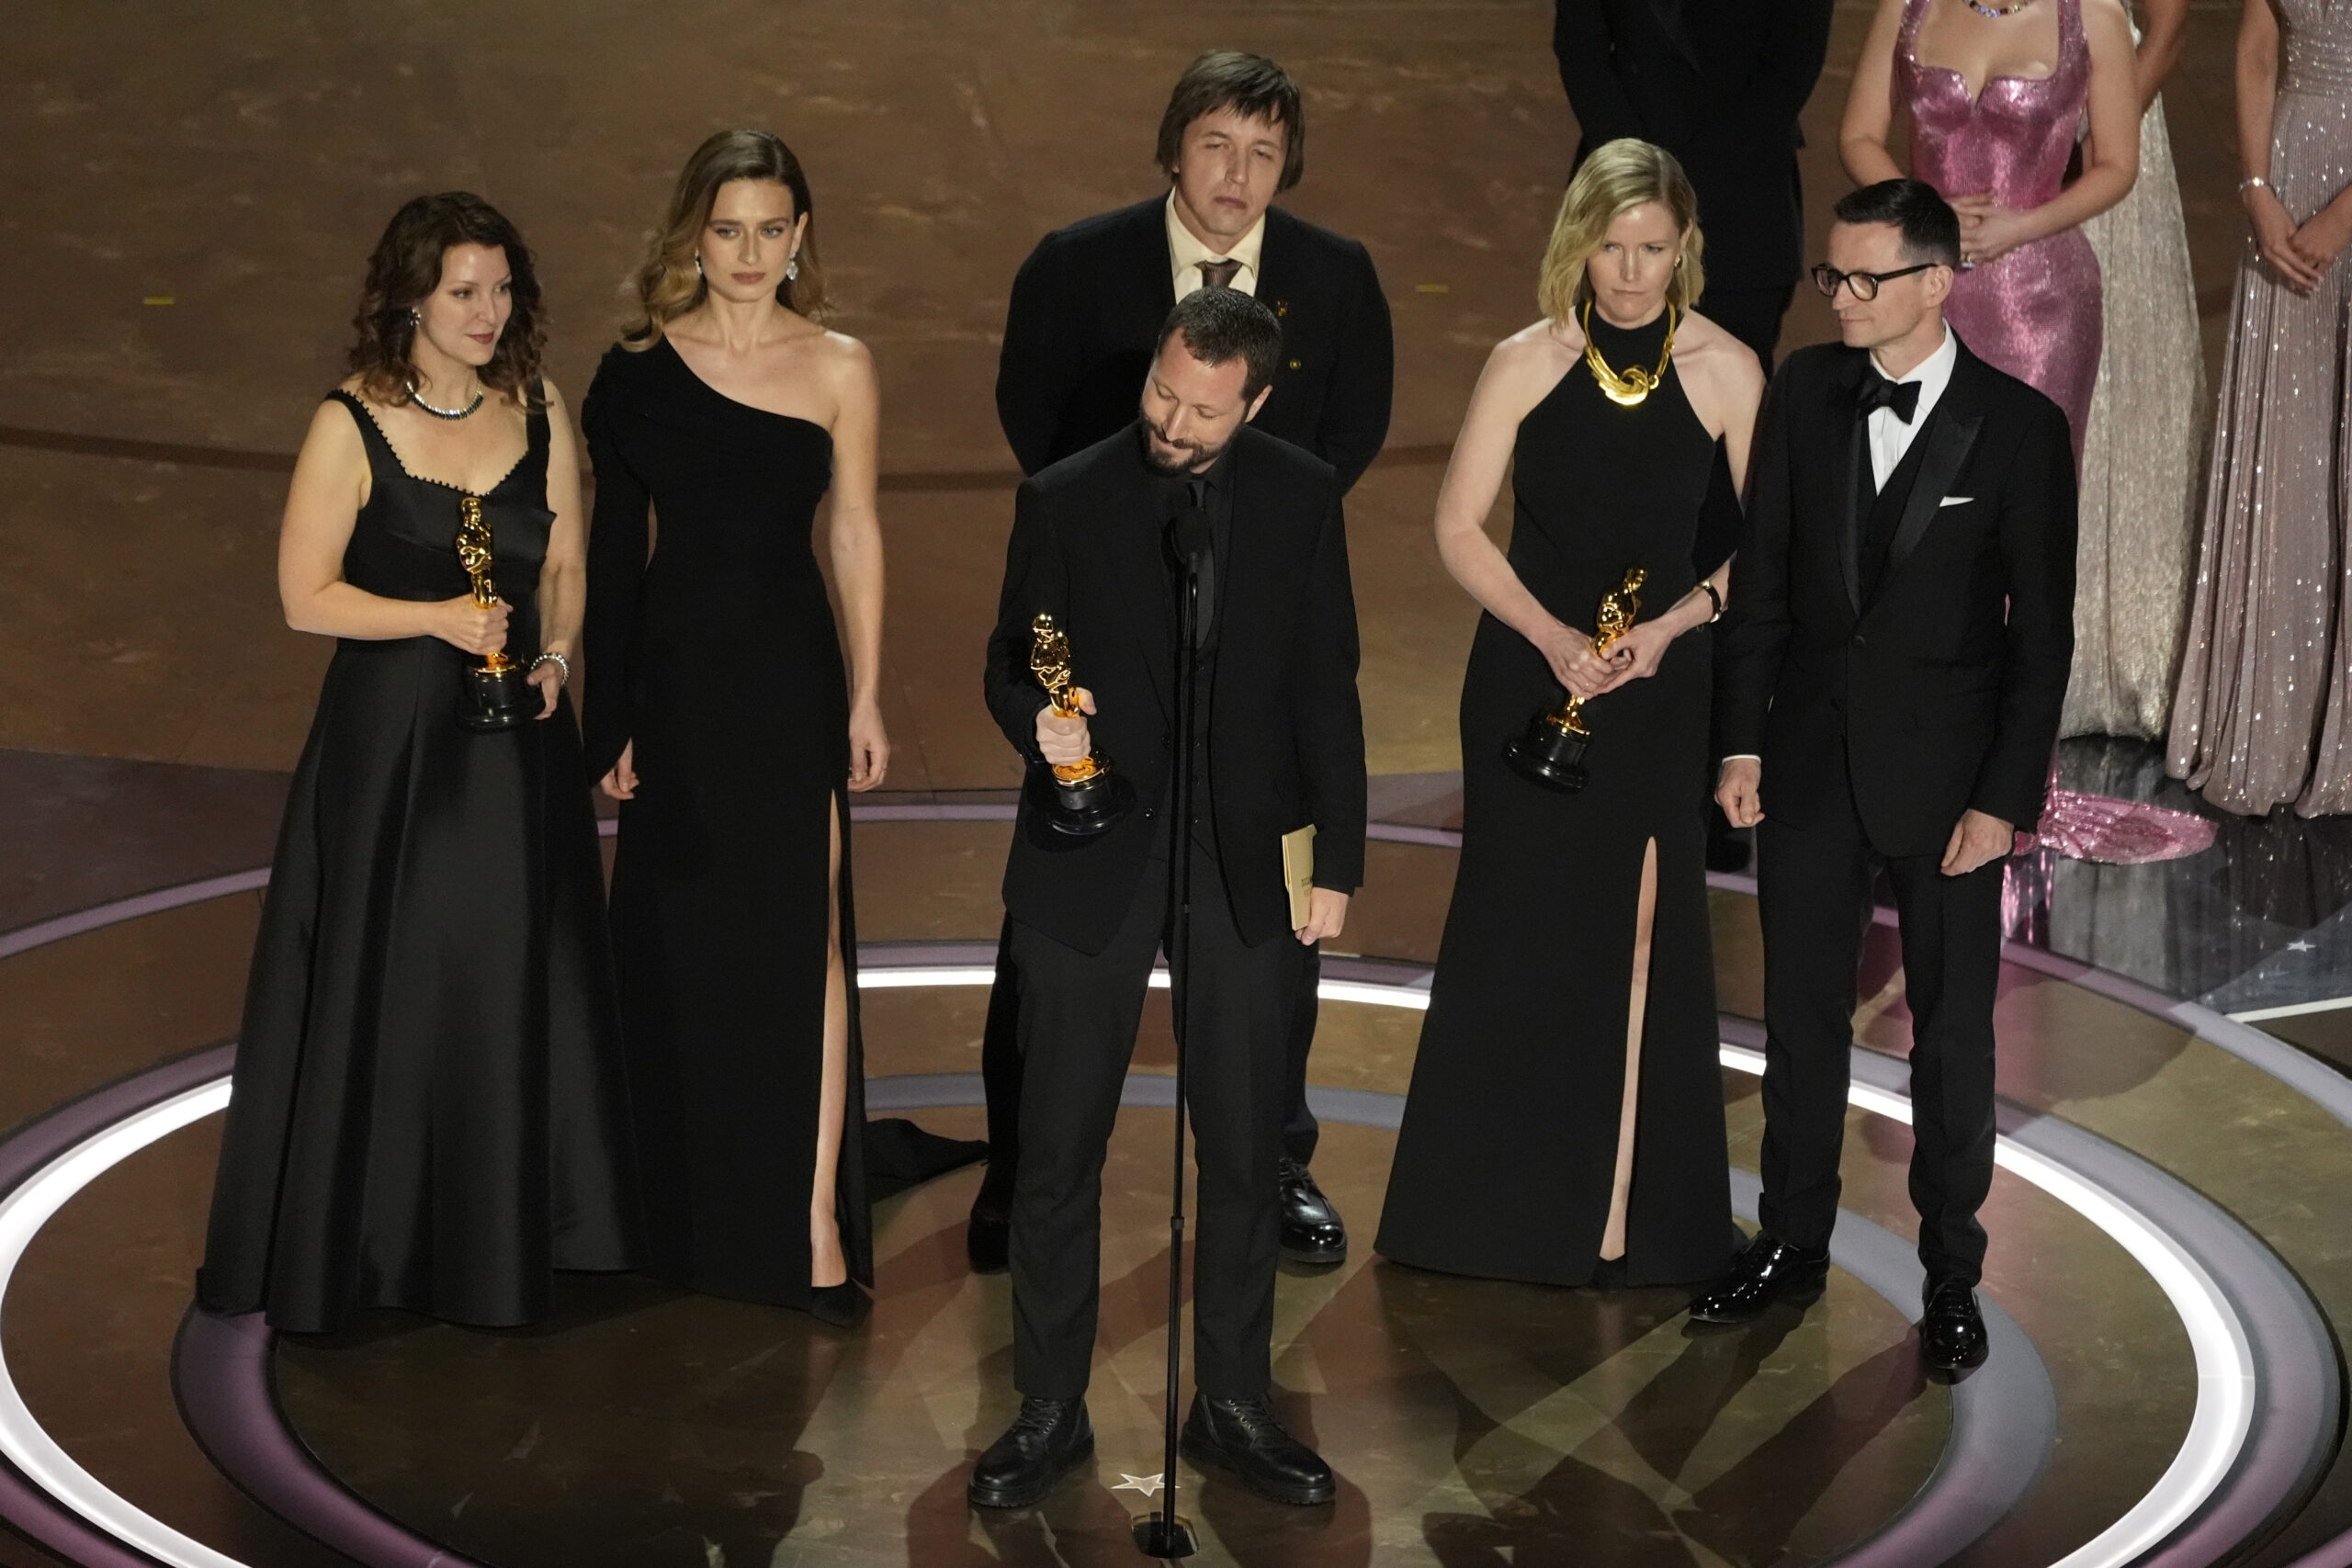 Raney Aronson-Rath, from left, Vasilisa Stepanenko, Mstyslav Chernov, Evgeniy Maloletka, Michelle Mizner, and Derl McCrudden accept the award for best documentary feature film for "20 Days in Mariupol" during the Oscars on Sunday, March 10, 2024, at the Dolby Theatre in Los Angeles.